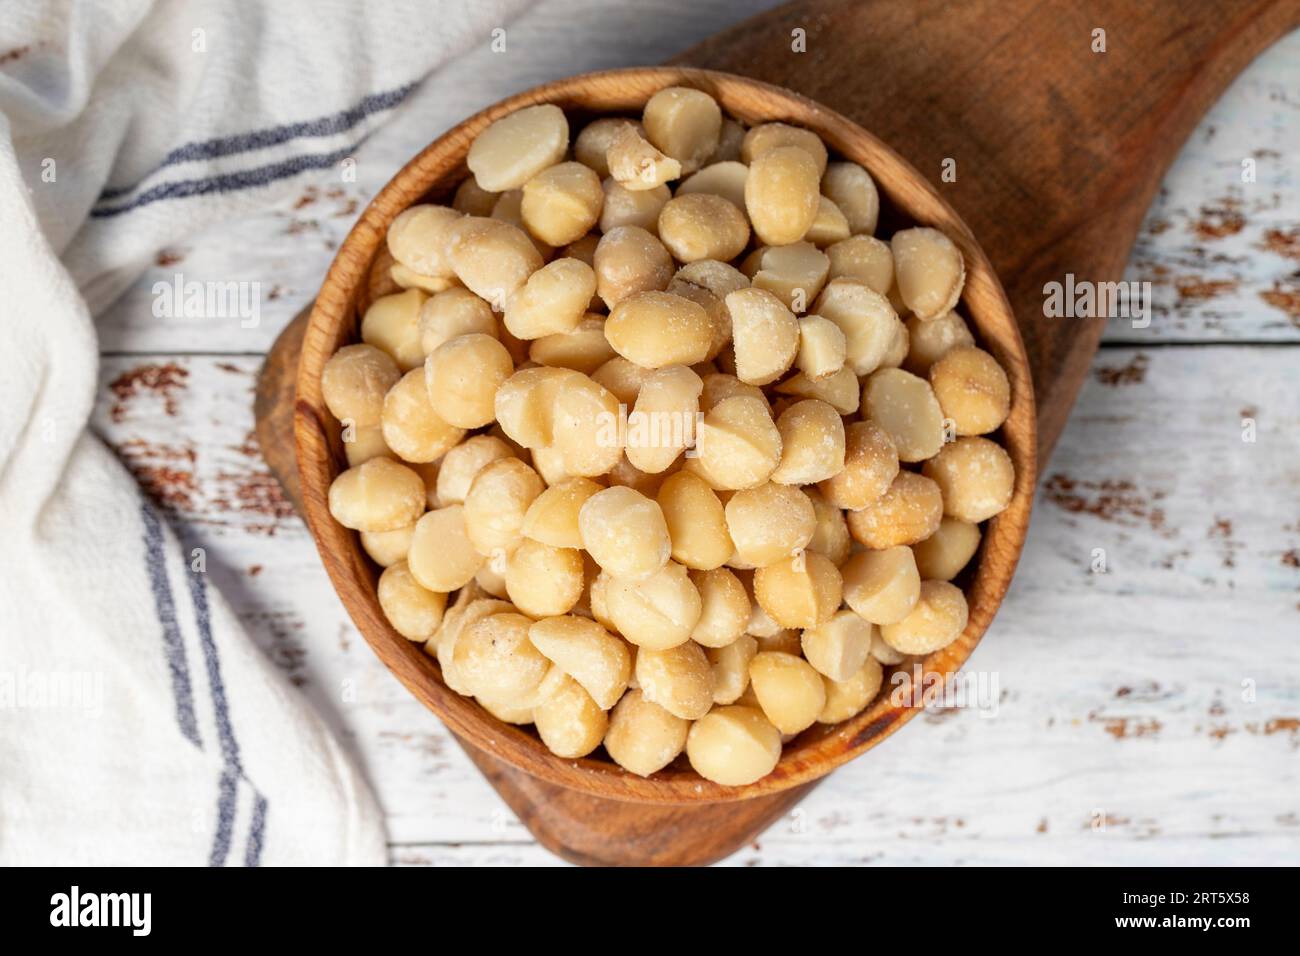 Macadamia nut in wood bowl. Macadamia nuts peeled on white wood background. Top view Stock Photo